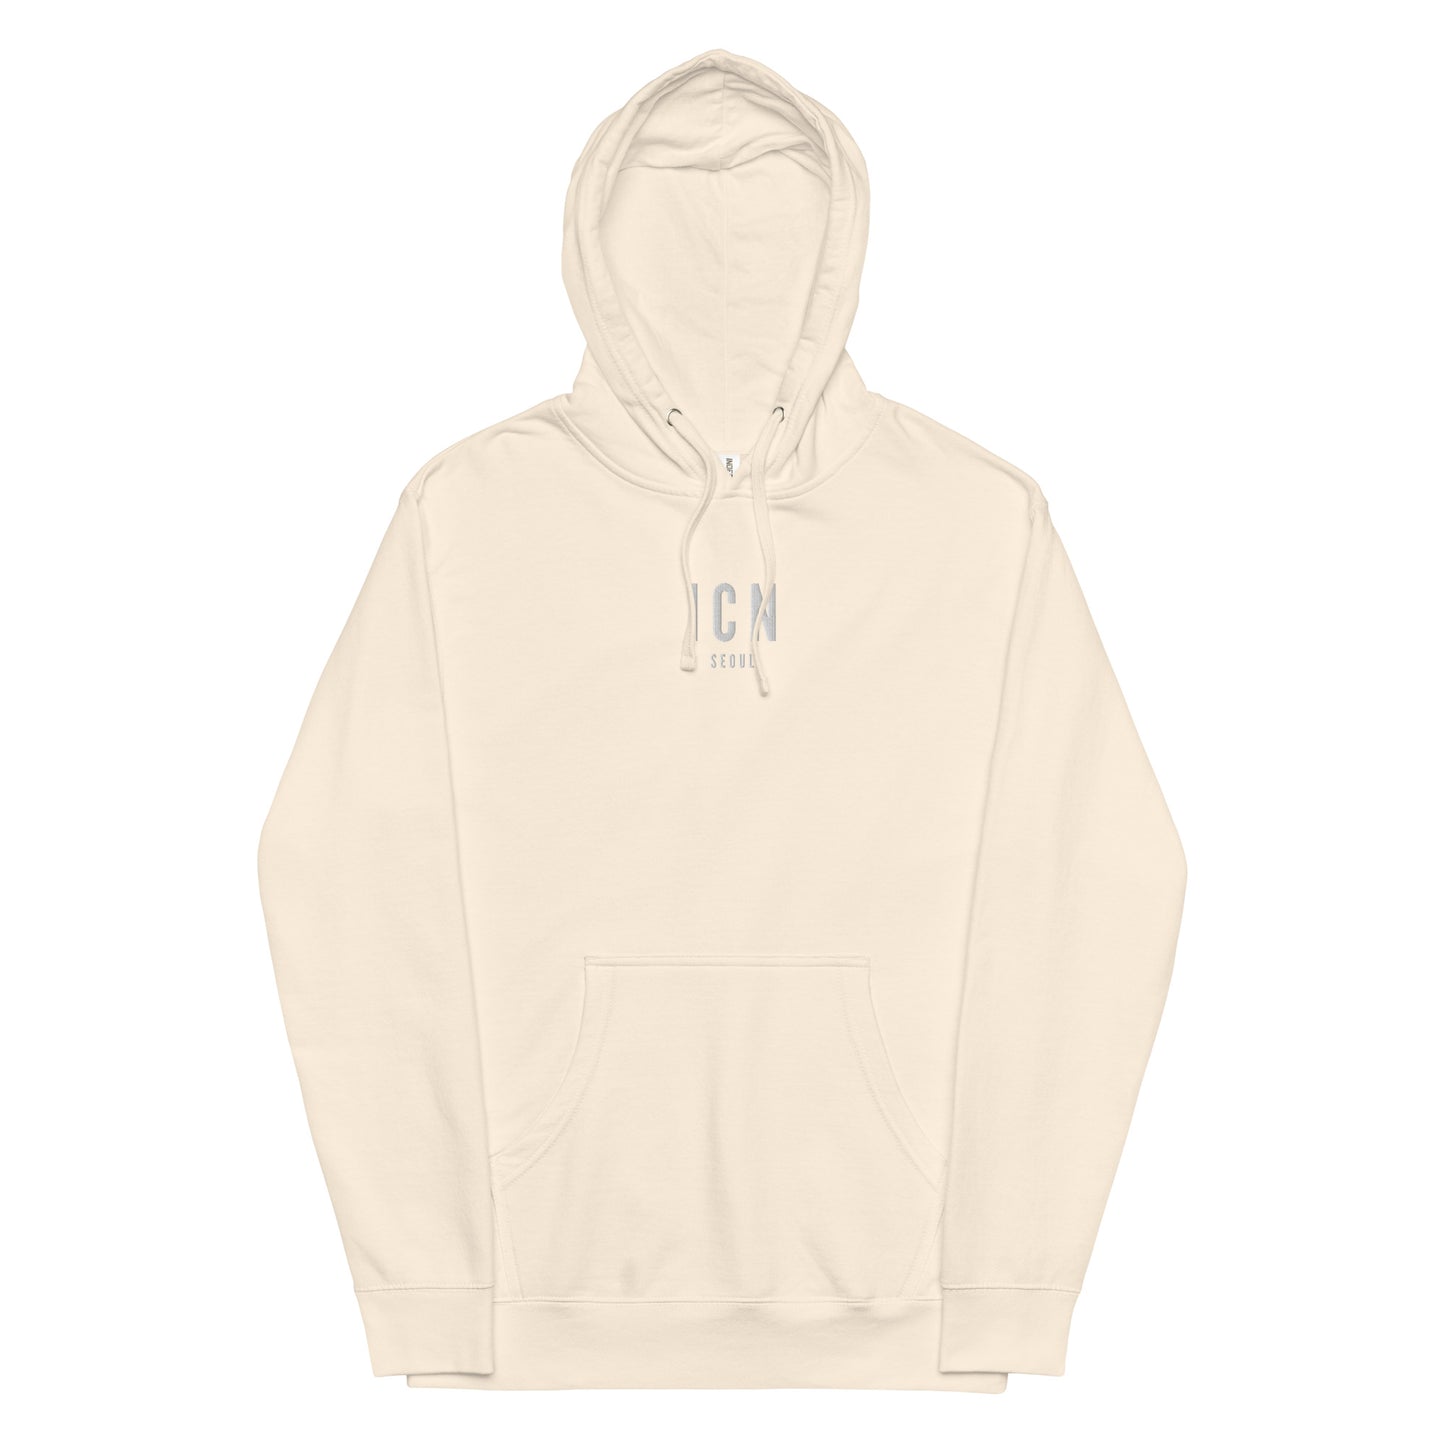 City Midweight Hoodie - White • ICN Seoul • YHM Designs - Image 17